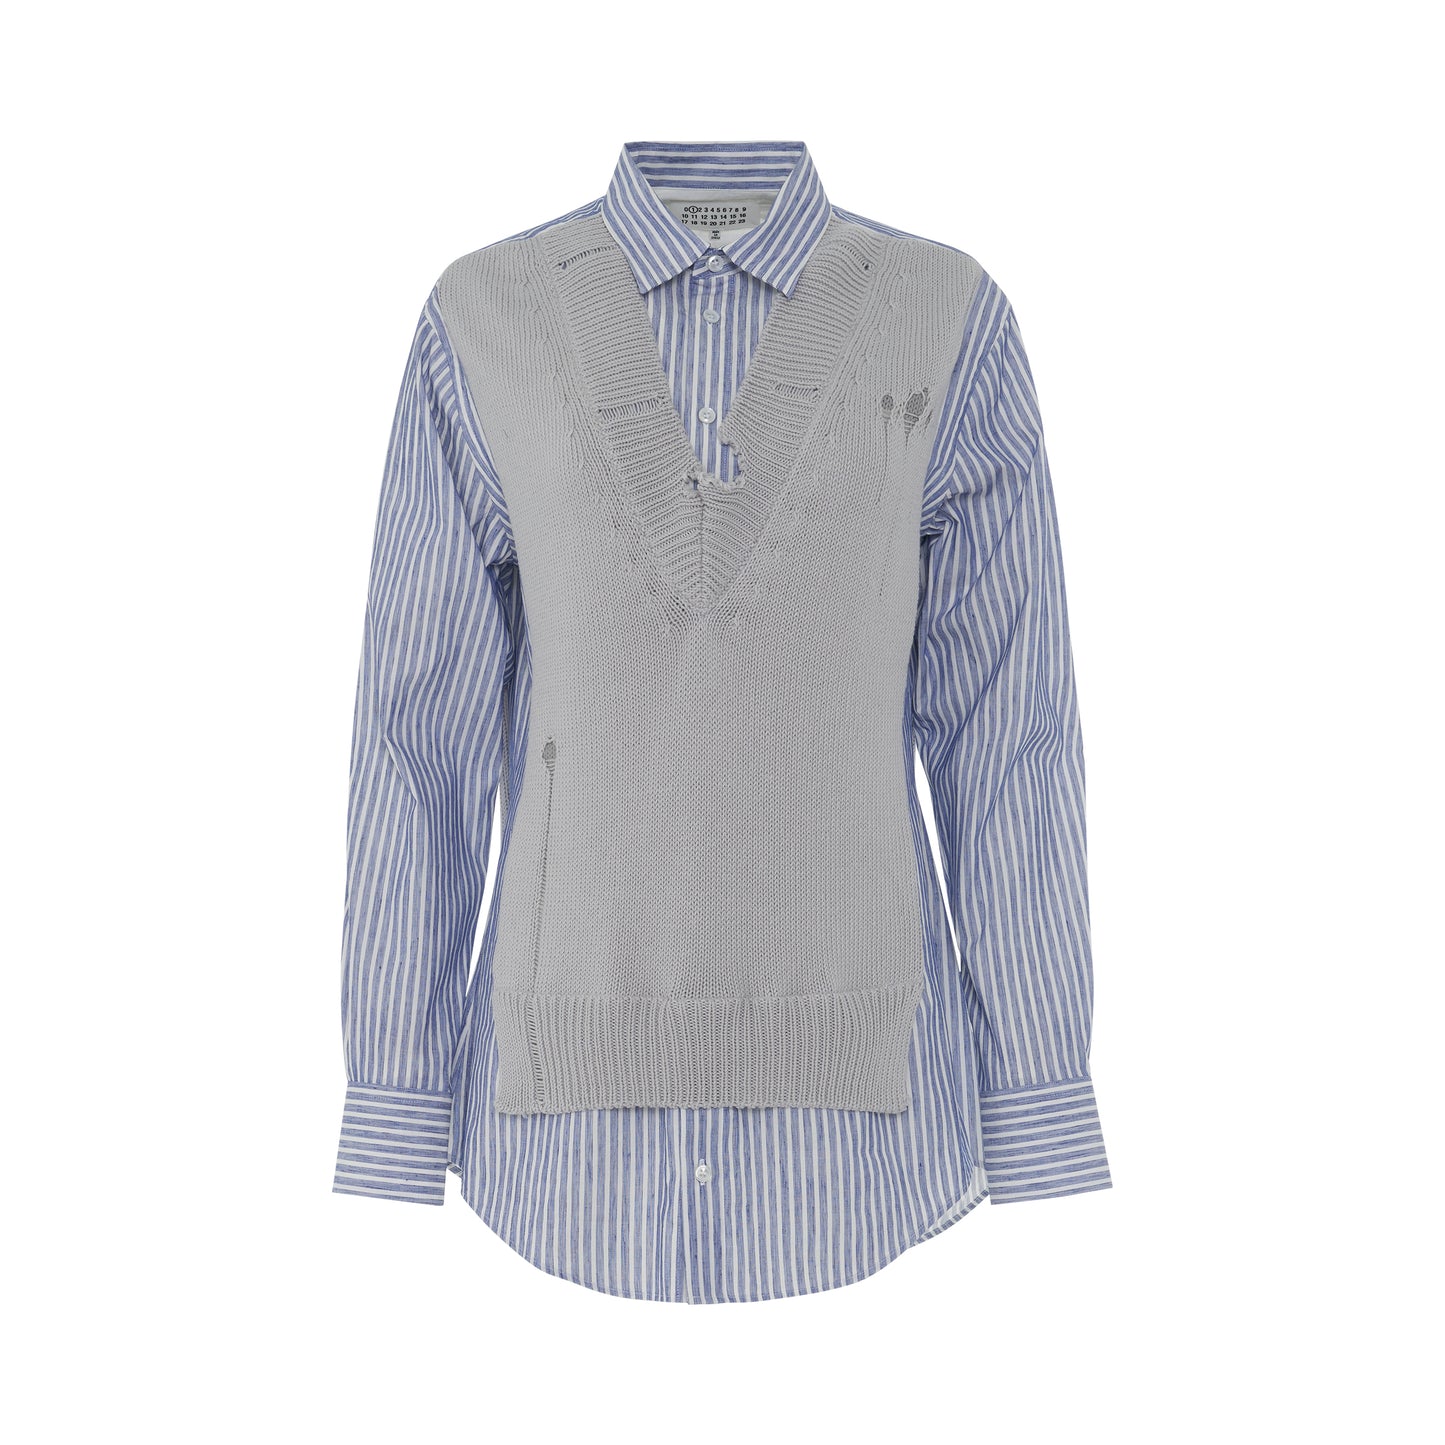 Layered Striped Cotton Shirt with Wool Vest in Blue/Grey